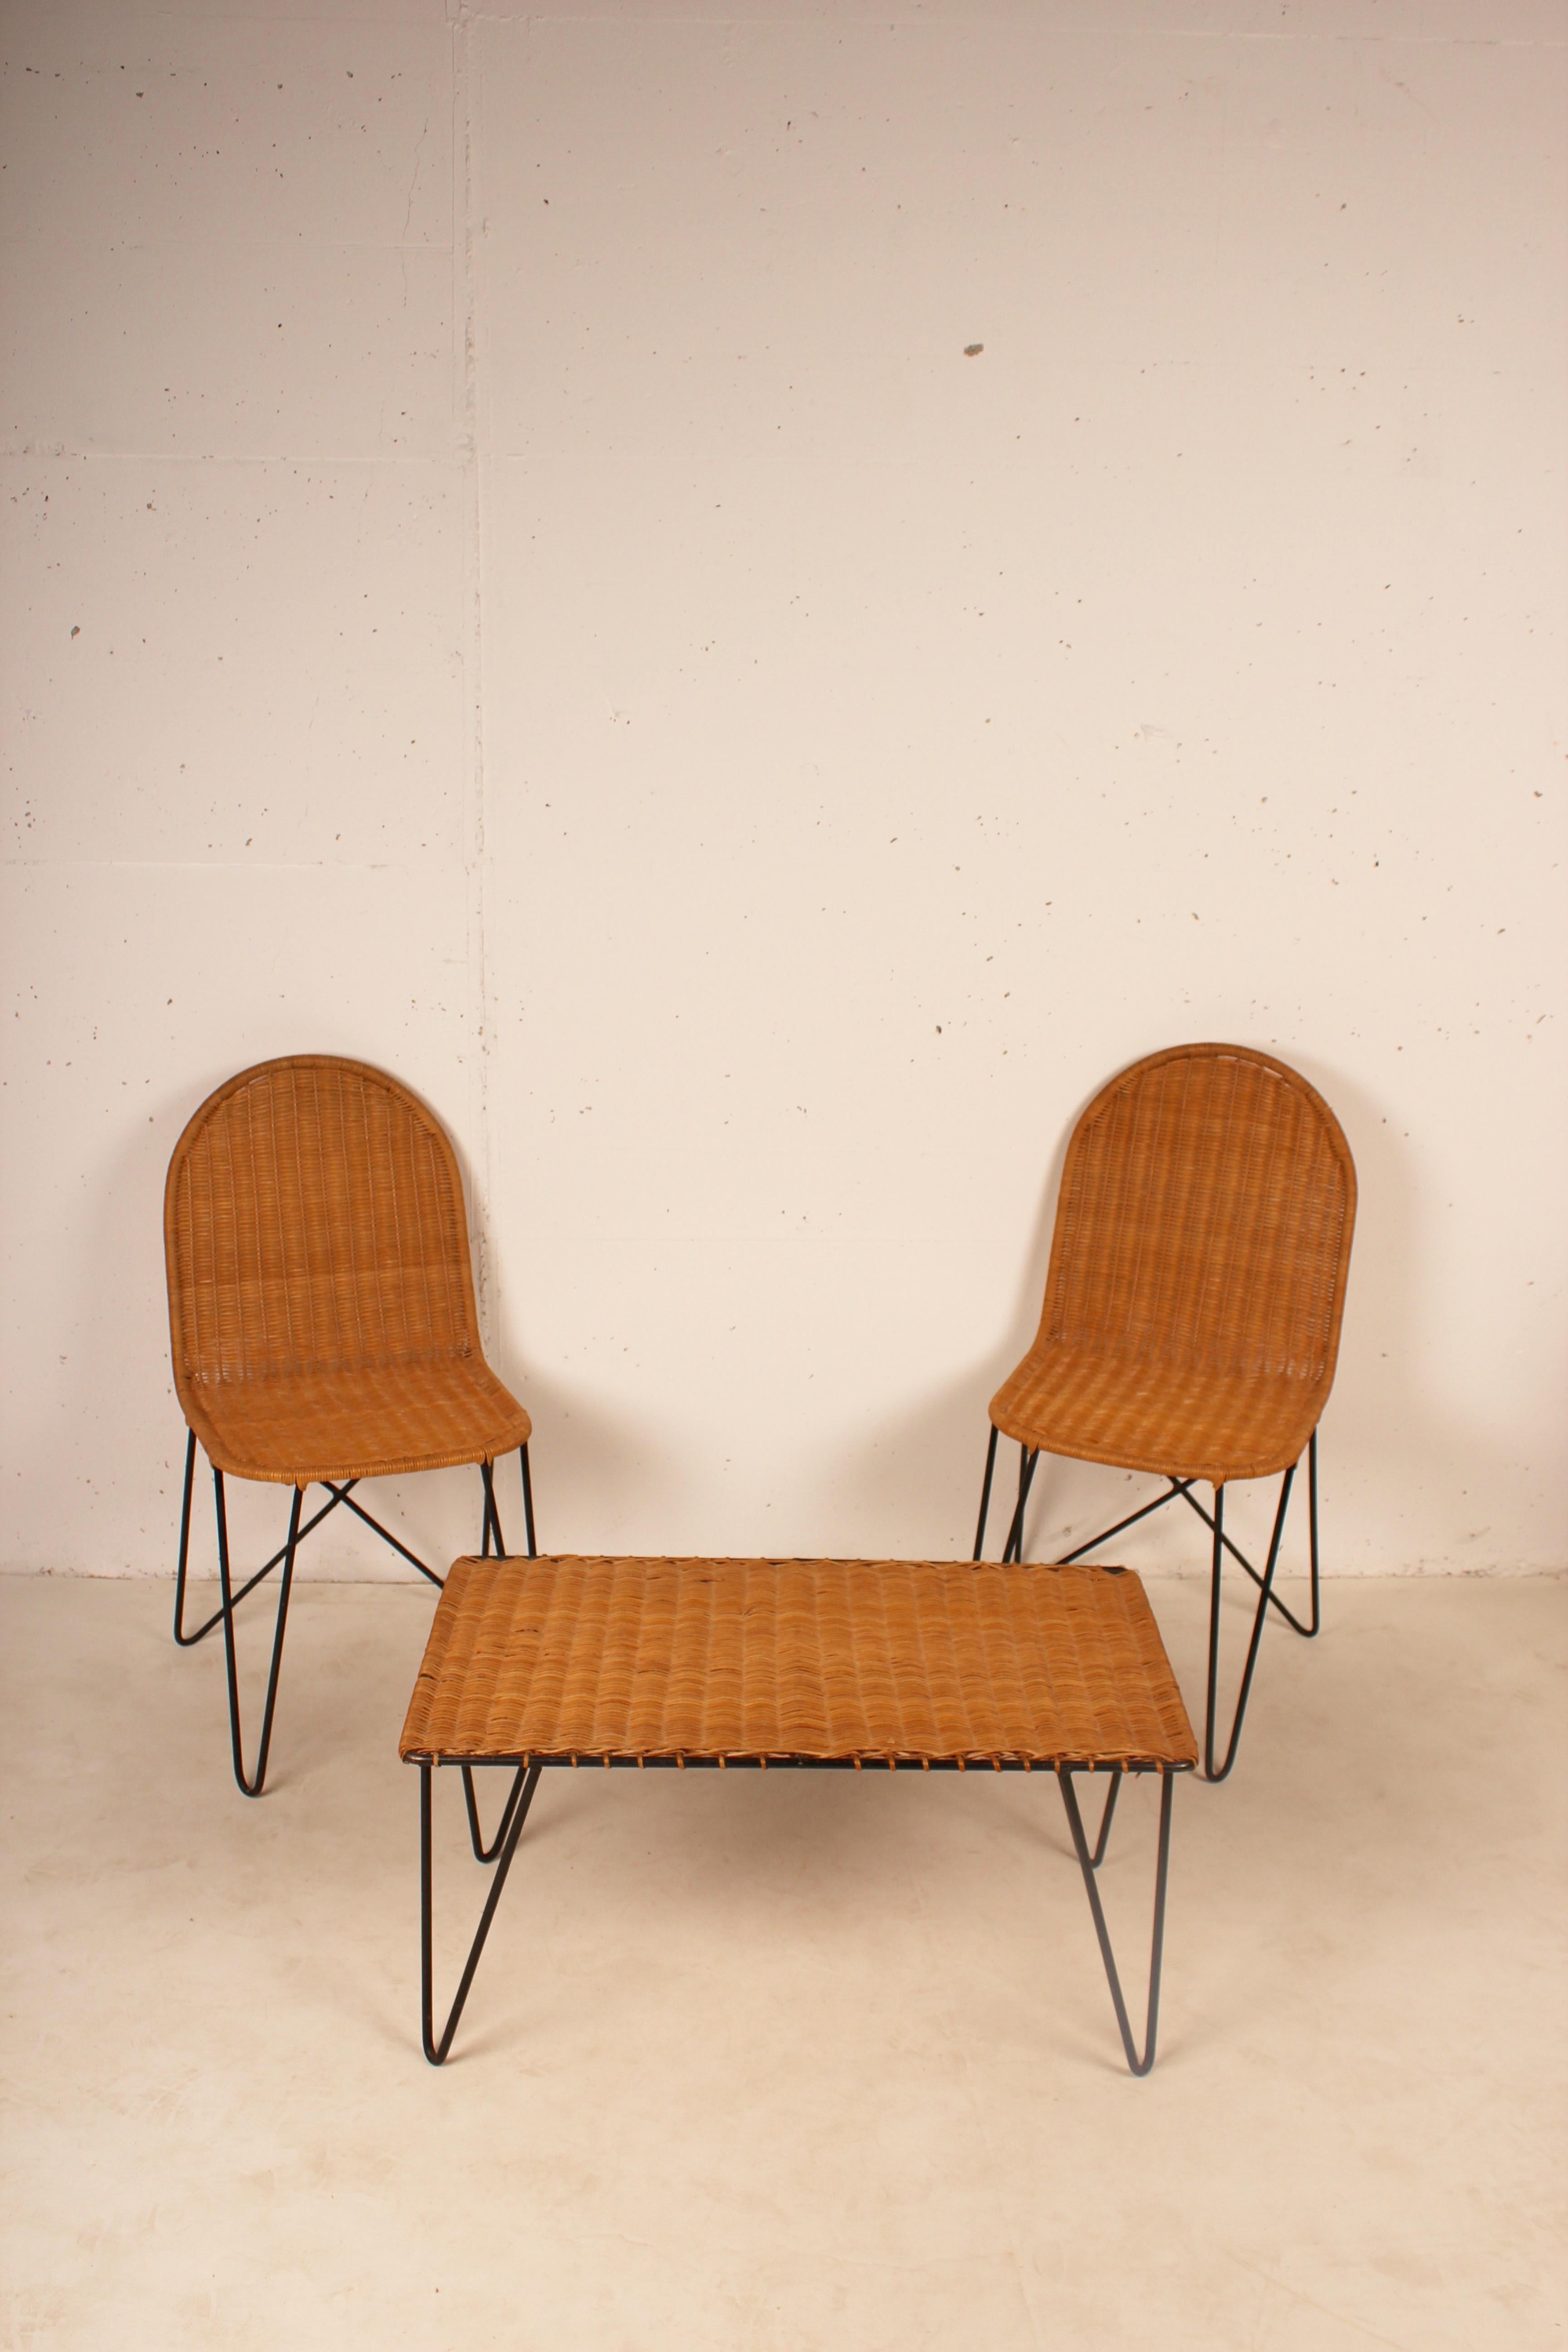 Outdoor wicker set, coffee table and 2 chairs by Raoul Guys, France 1950, wicker on lacquered metal base.

Measures: coffee table 73 D x 42 W x 37 H cm
chair 52 D x 38 W x 77 H cm.
  